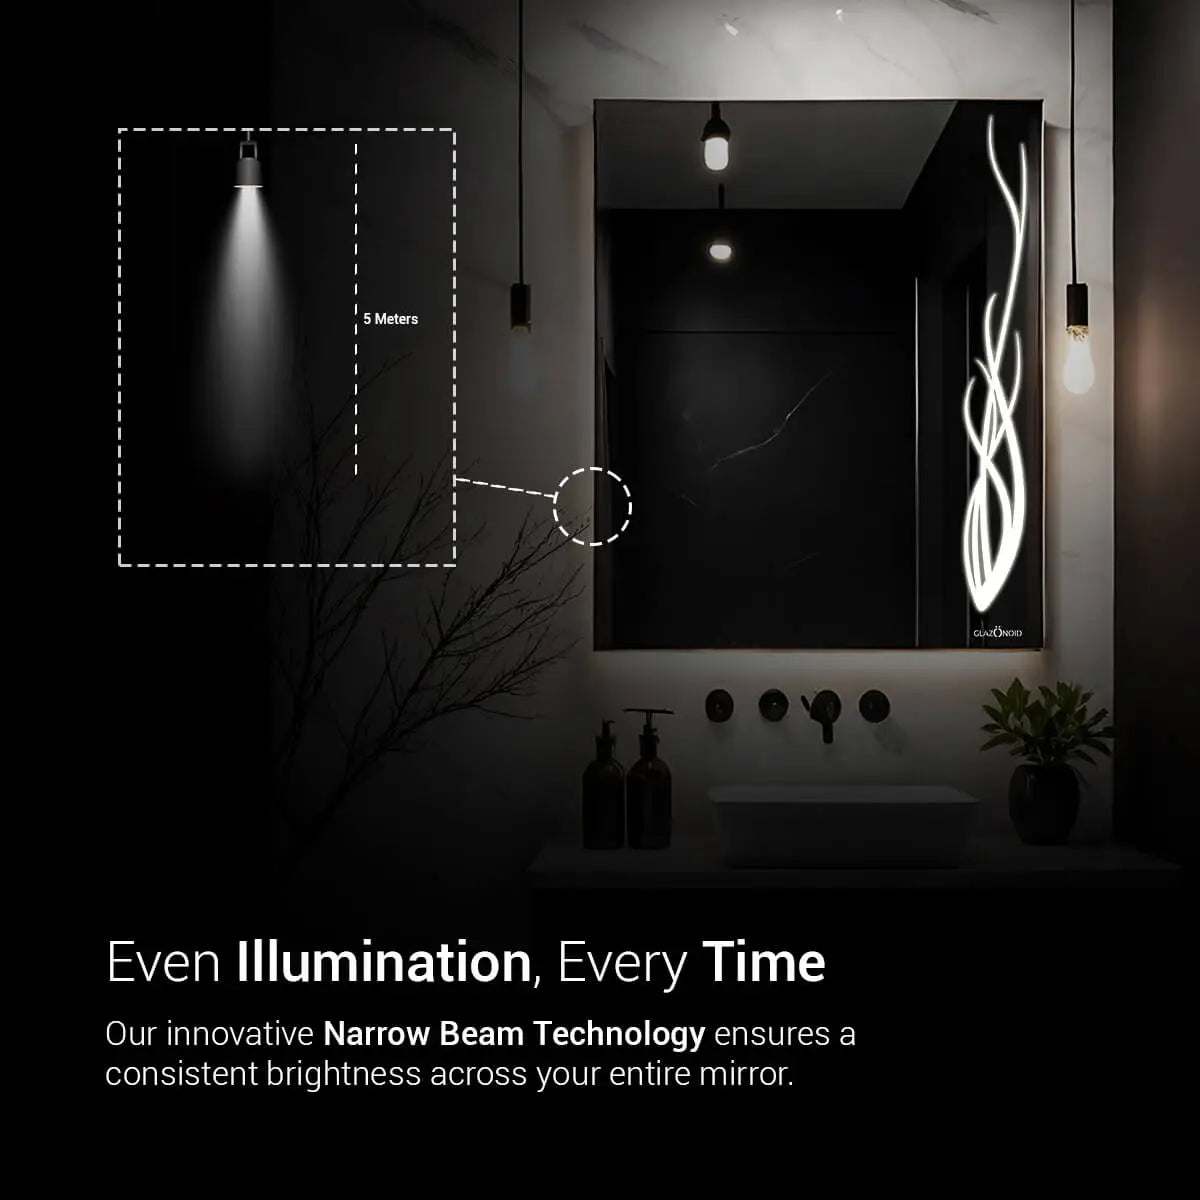  Illuminated rectangular bathroom mirror with Even Illumination Narrow Beam Technology. This technology ensures consistent brightness across the entire mirror's surface. The mirror is mounted above a bathroom sink with a countertop in a modern bathroom.